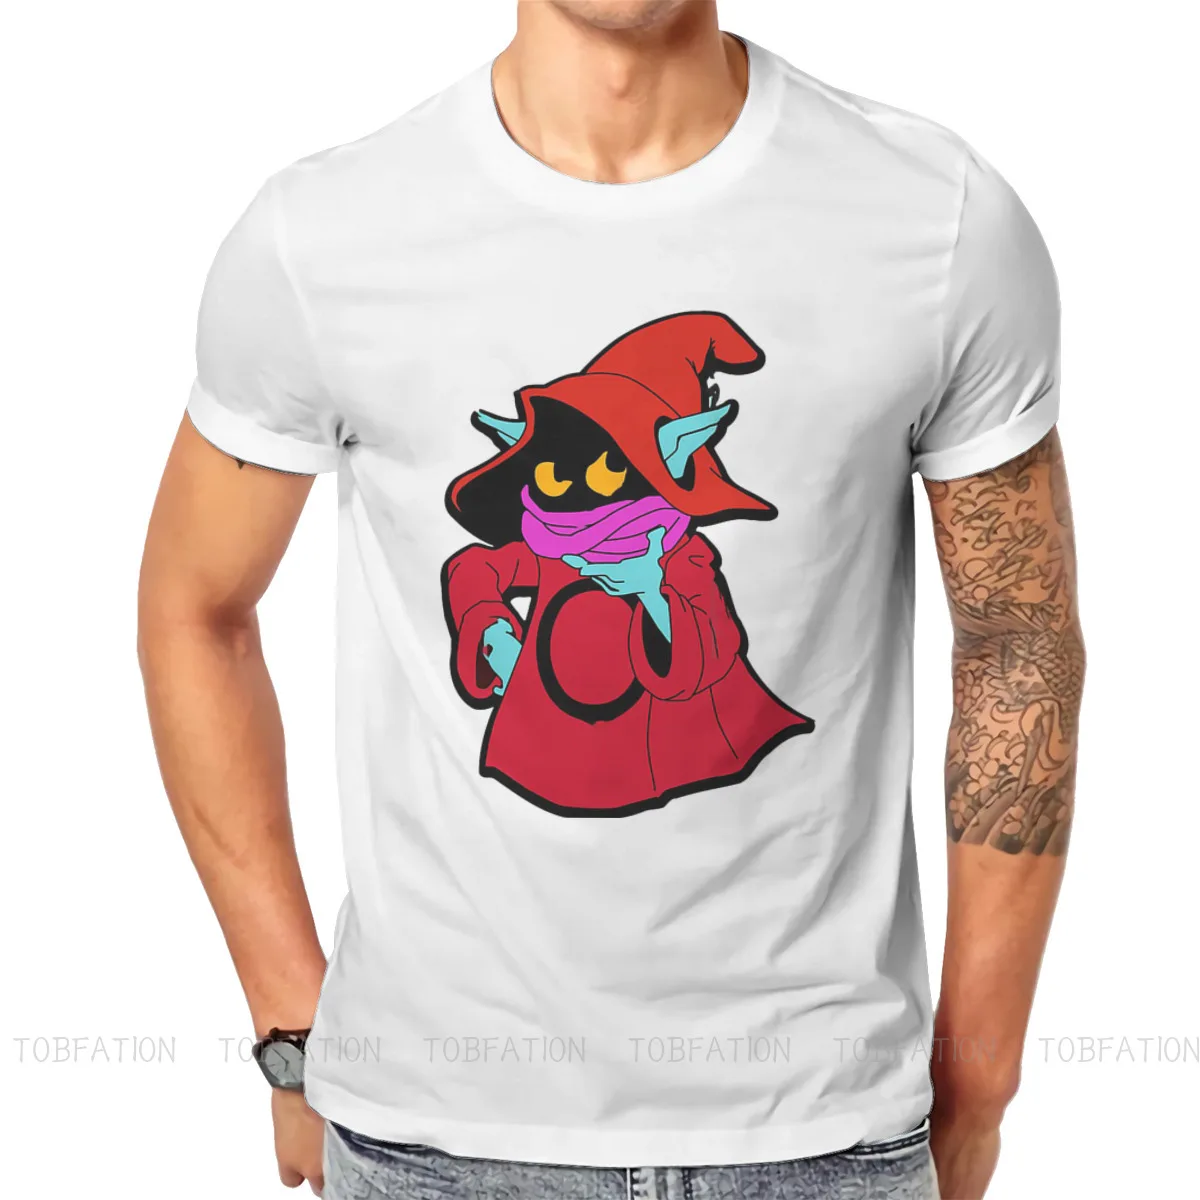 

He-Man and the Masters of the Universe Orko Thought Tshirt Classic Alternative Men Clothing Tops Loose Cotton Crewneck T Shirt